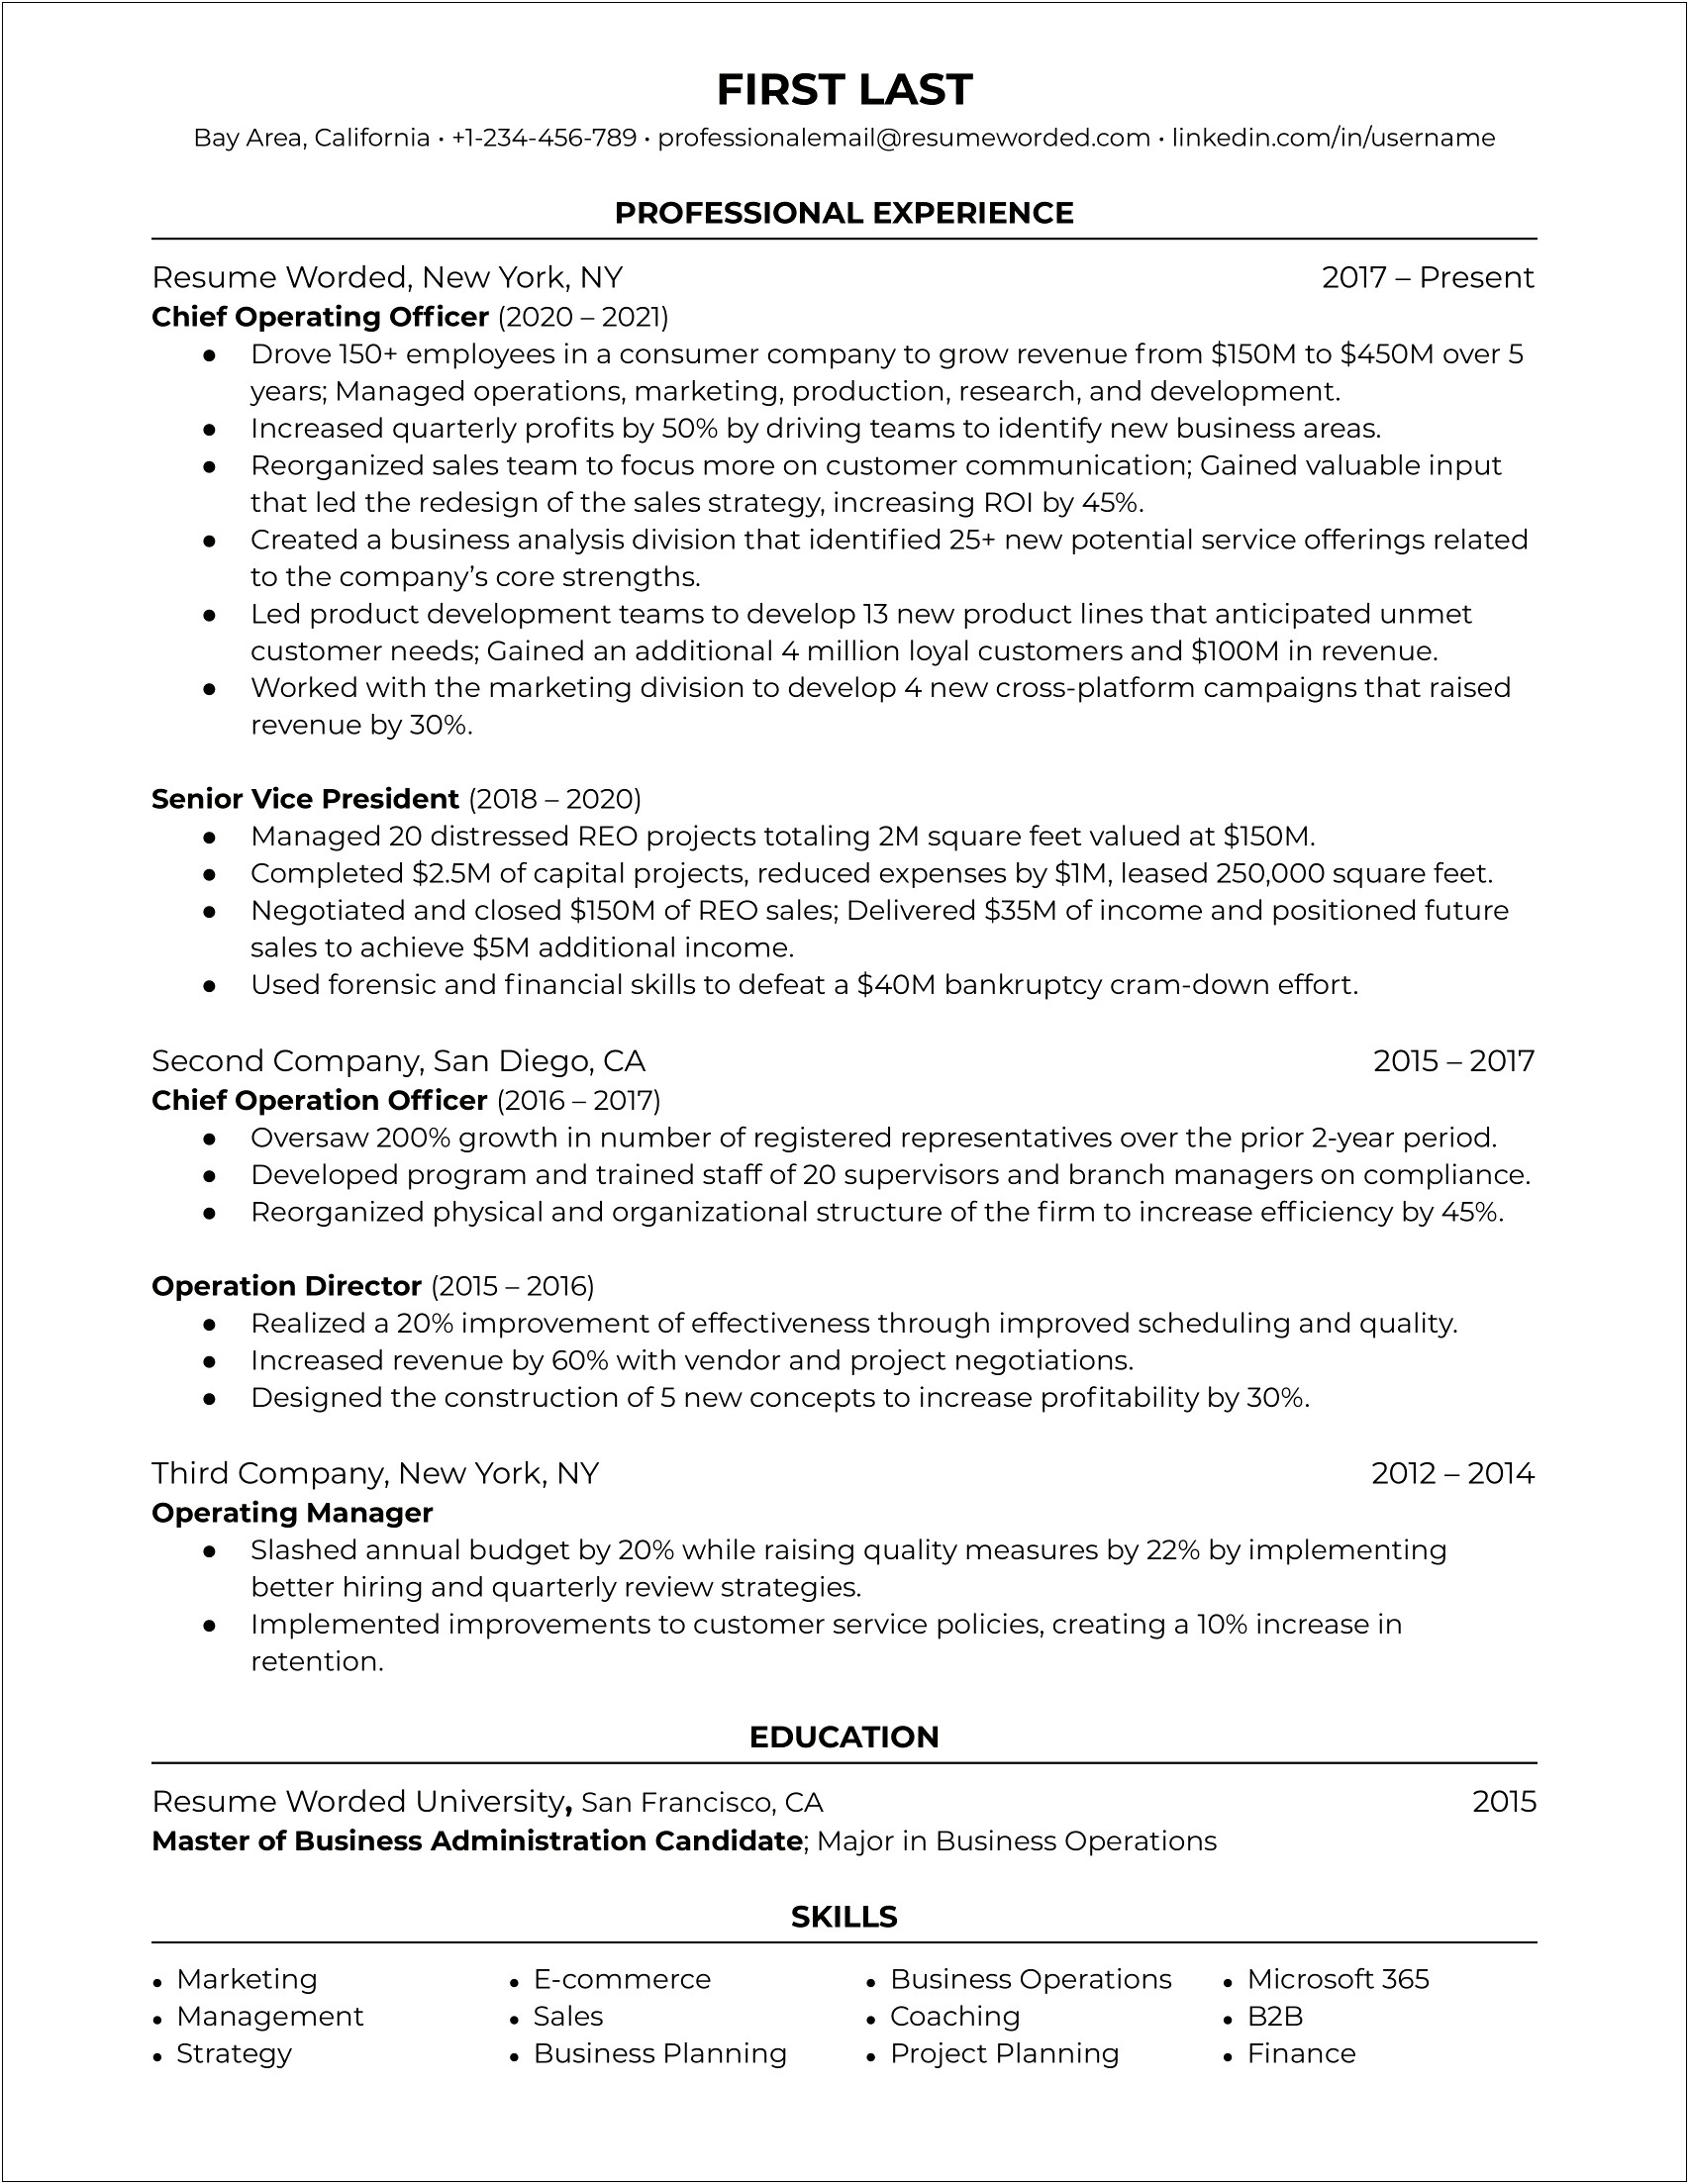 Sample Resume Of Chief Operating Officer